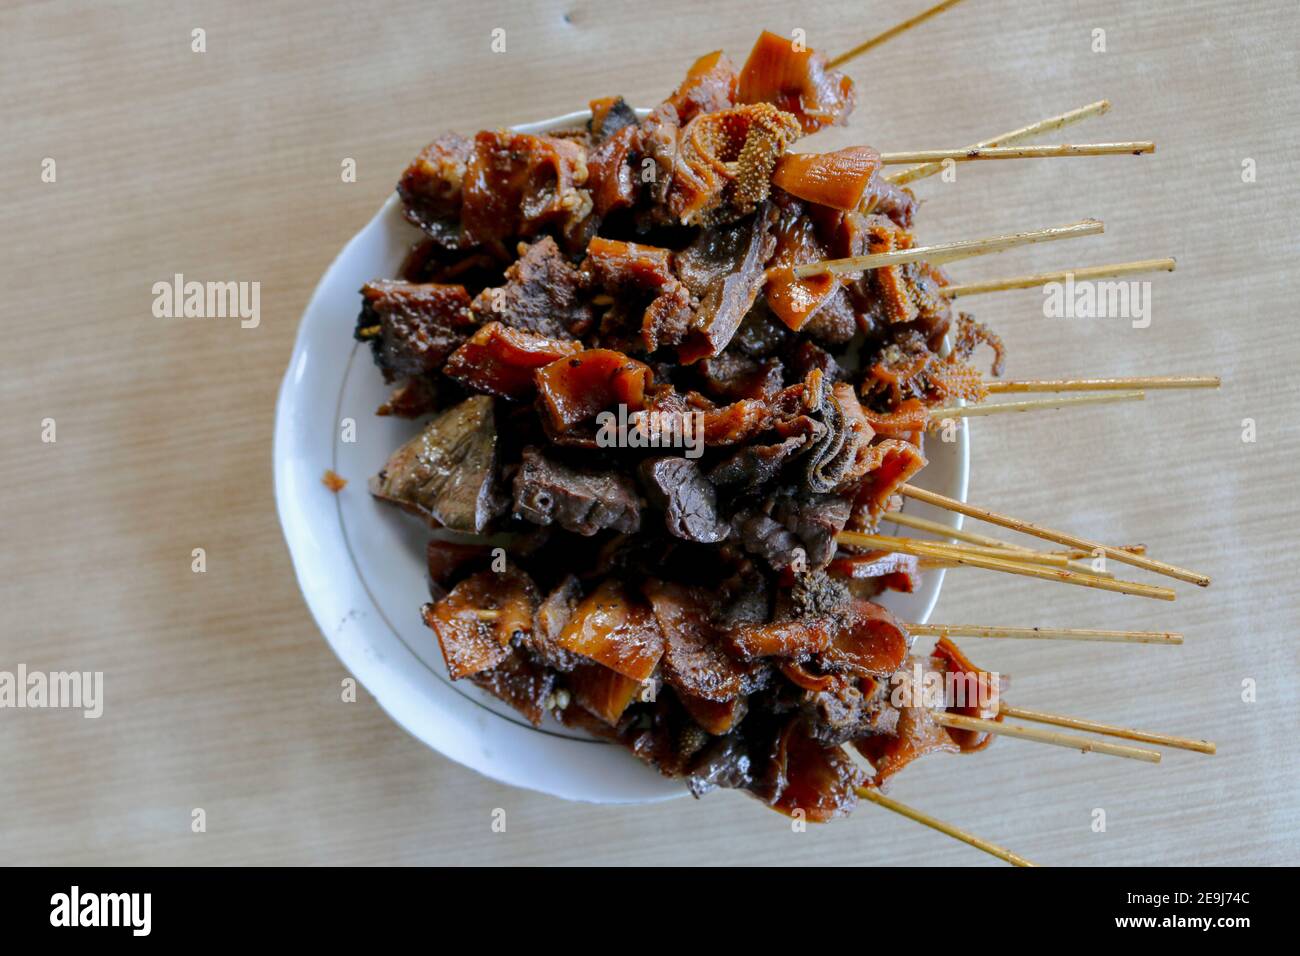 Sate Cingur or tongue satay, traditional satay from Indonesia for side dish. Stock Photo